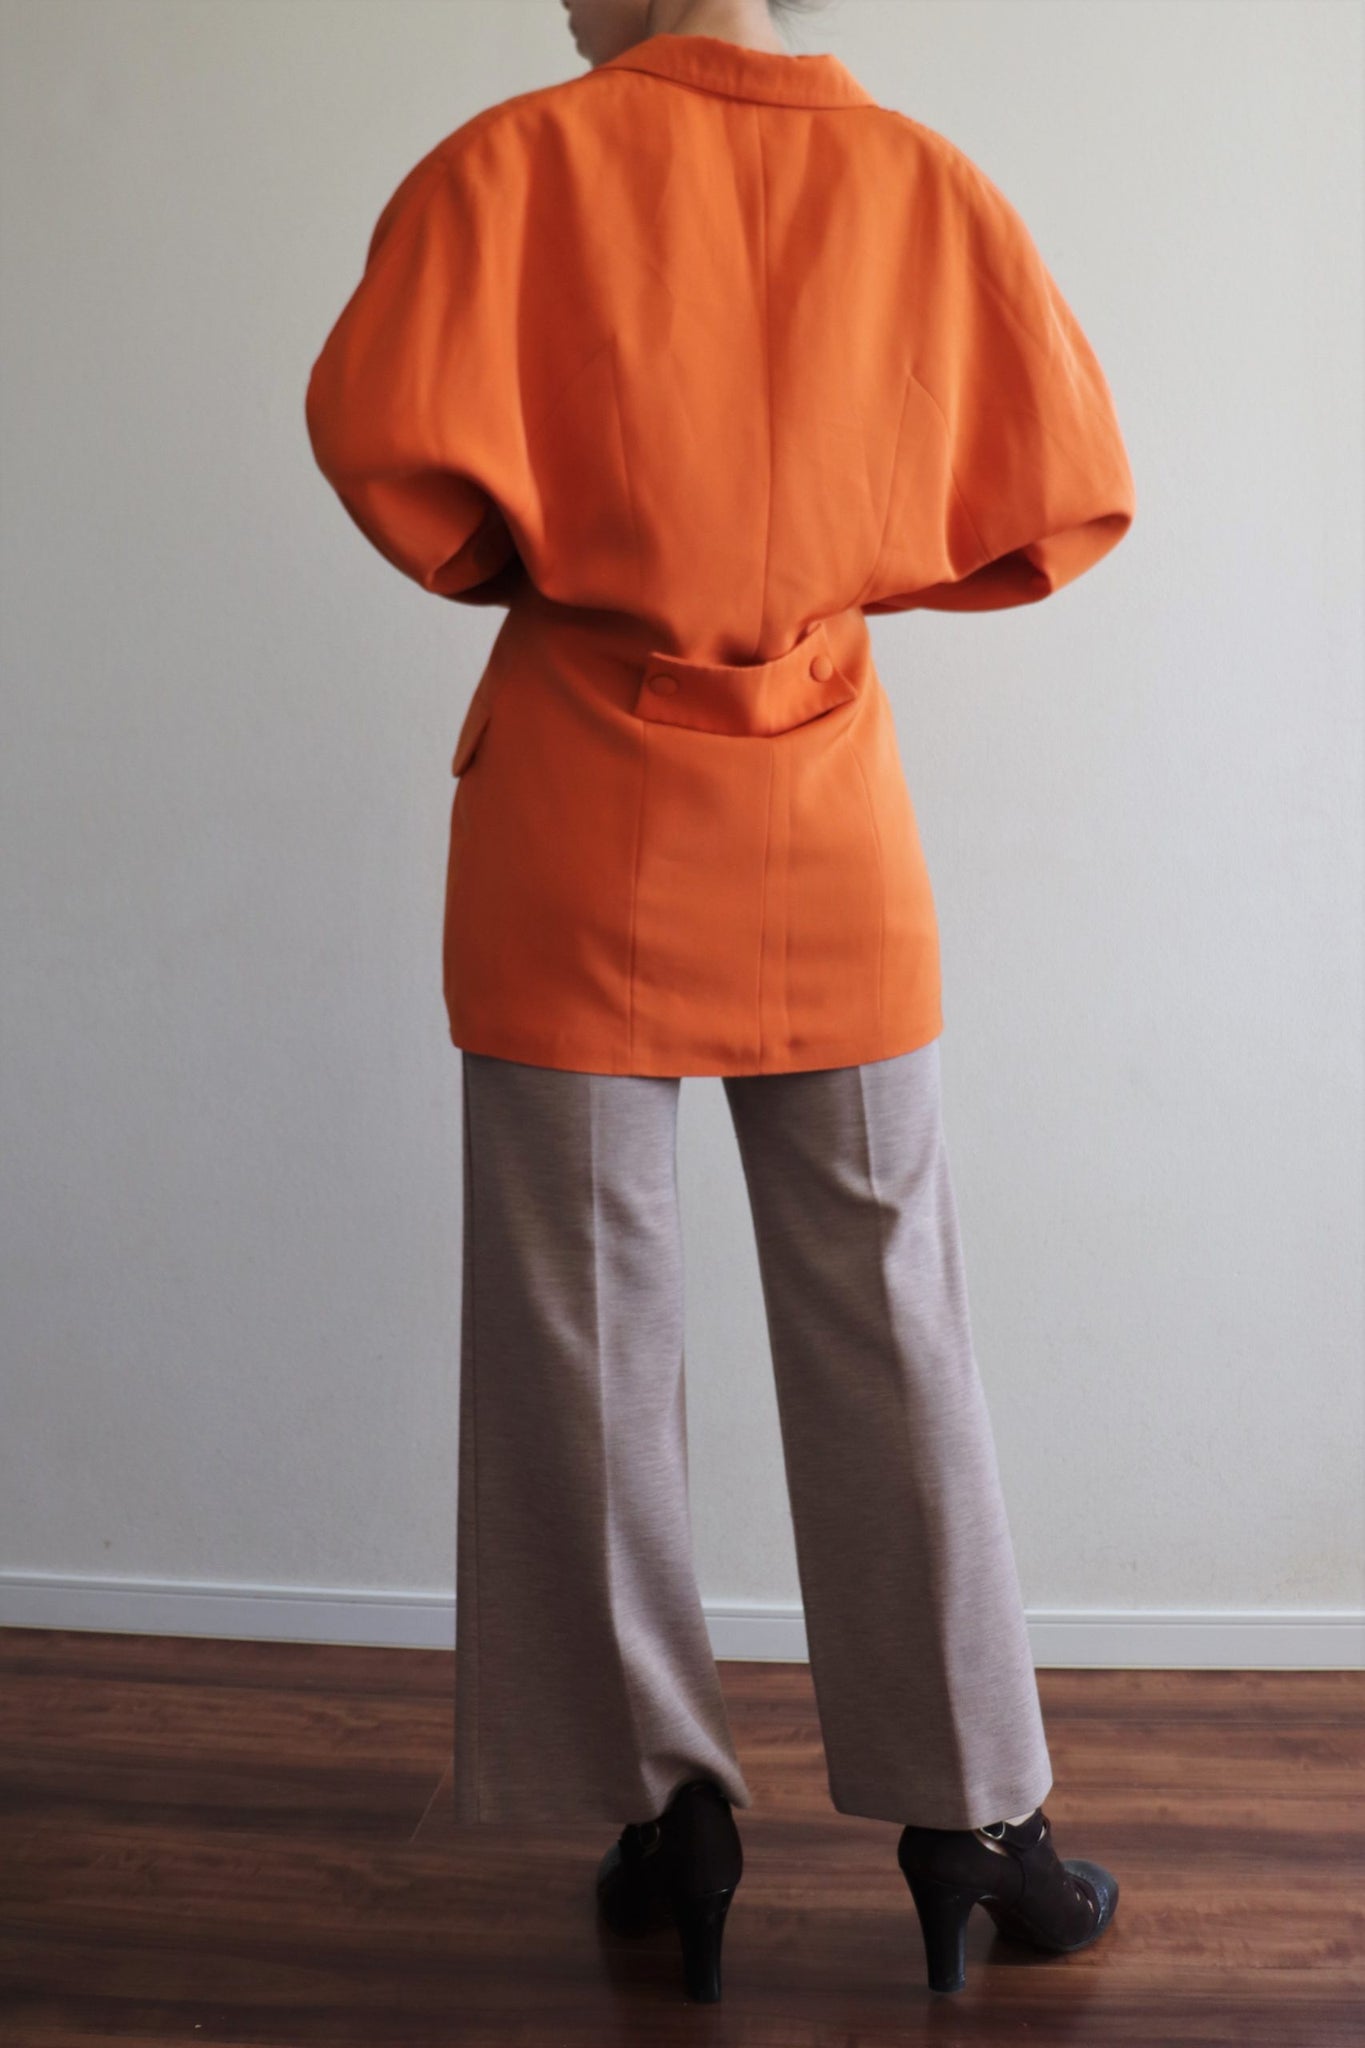 French Persimmon Vintage Jacket